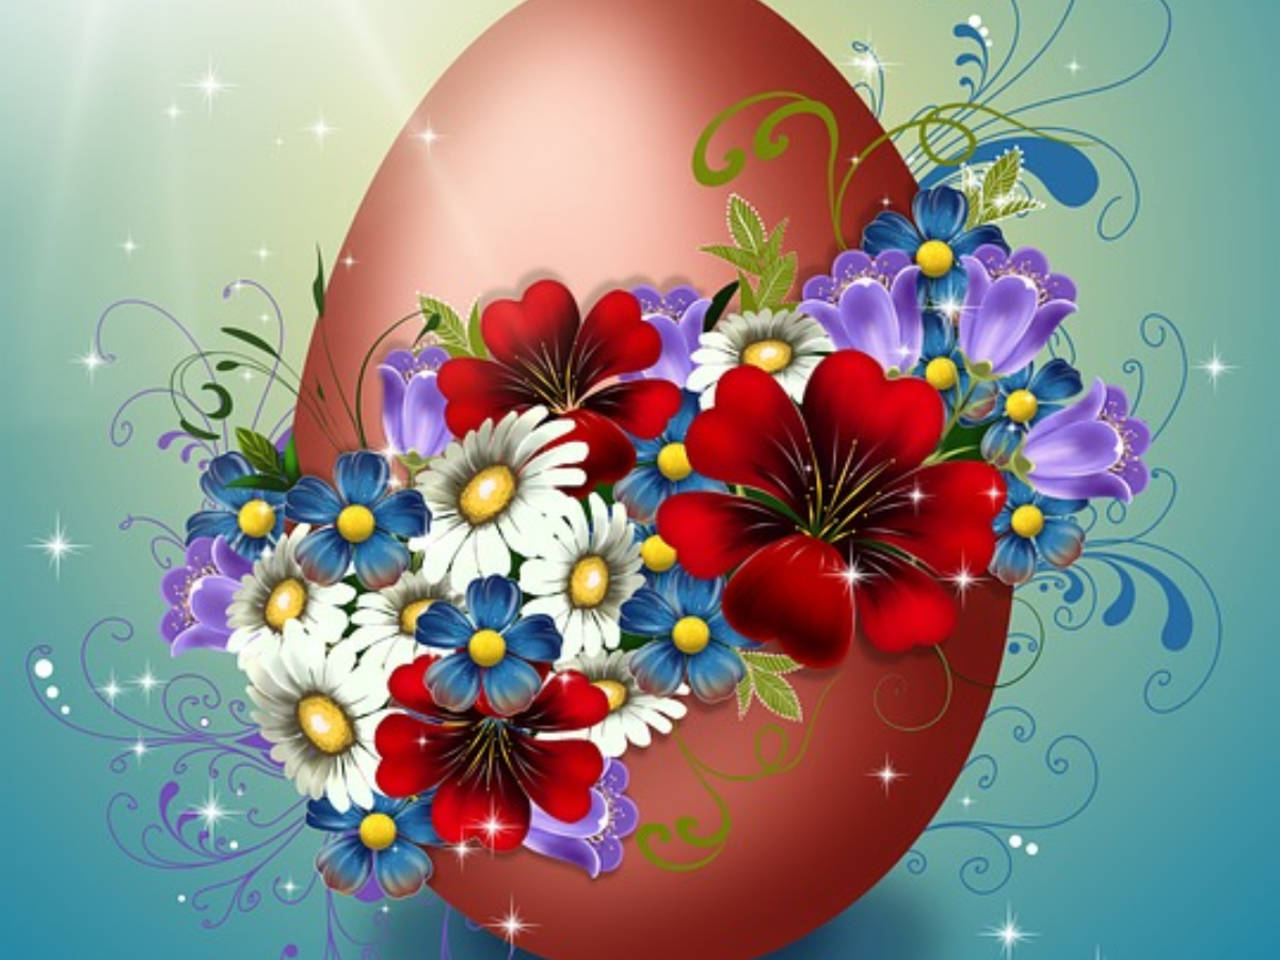 Happy Easter Sunday 2019: Images, Wishes, Messages, Cards ...